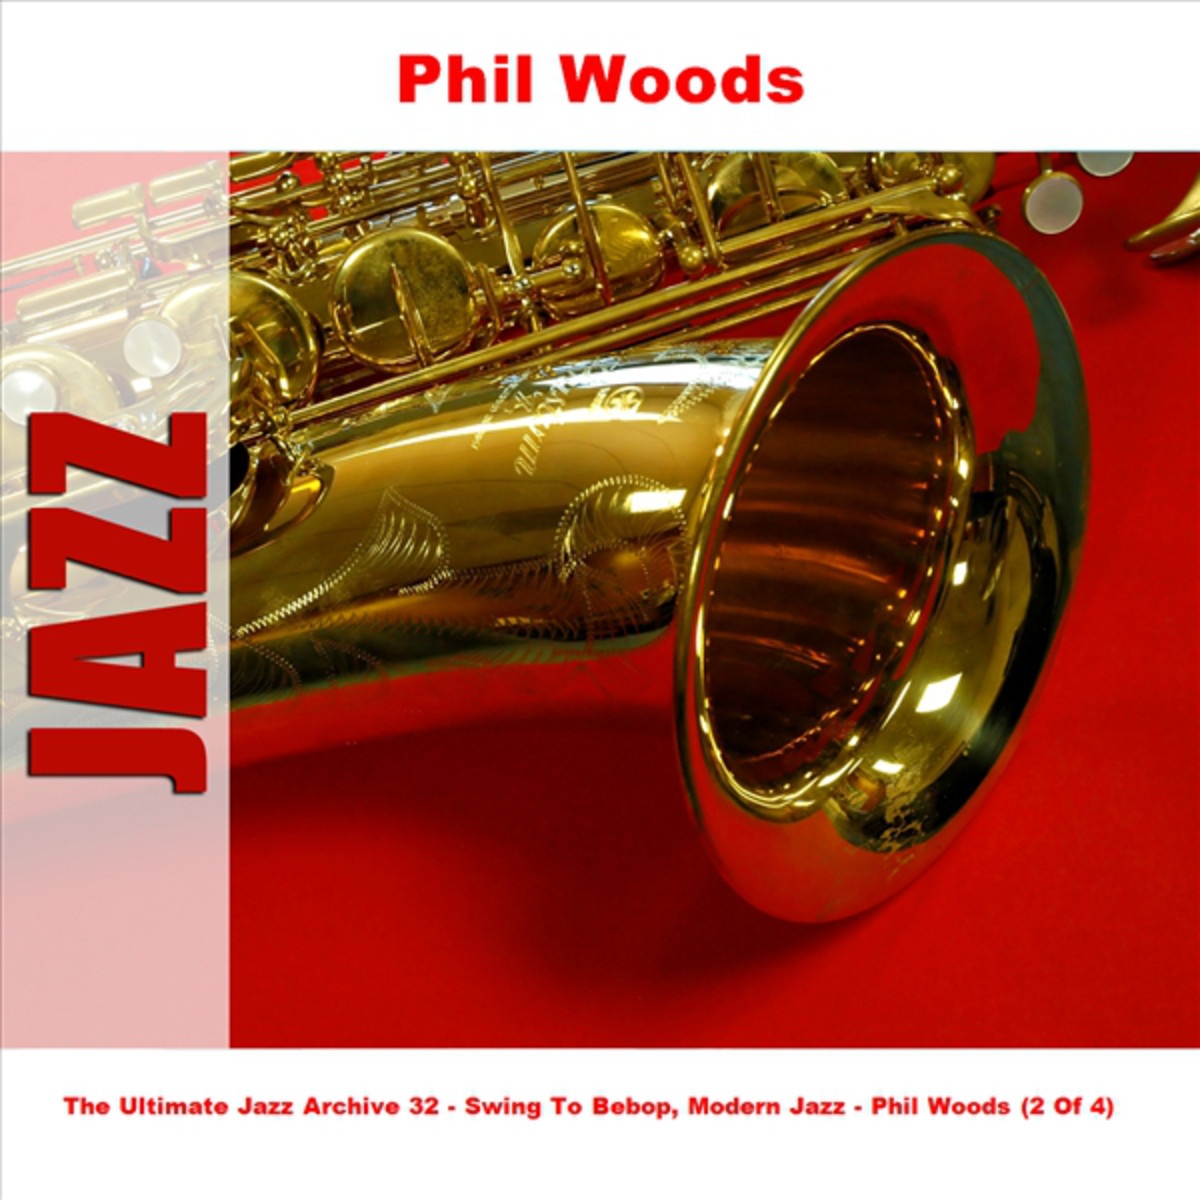 The Ultimate Jazz Archive 32 - Swing To Bebop, Modern Jazz - Phil Woods (2 Of 4)